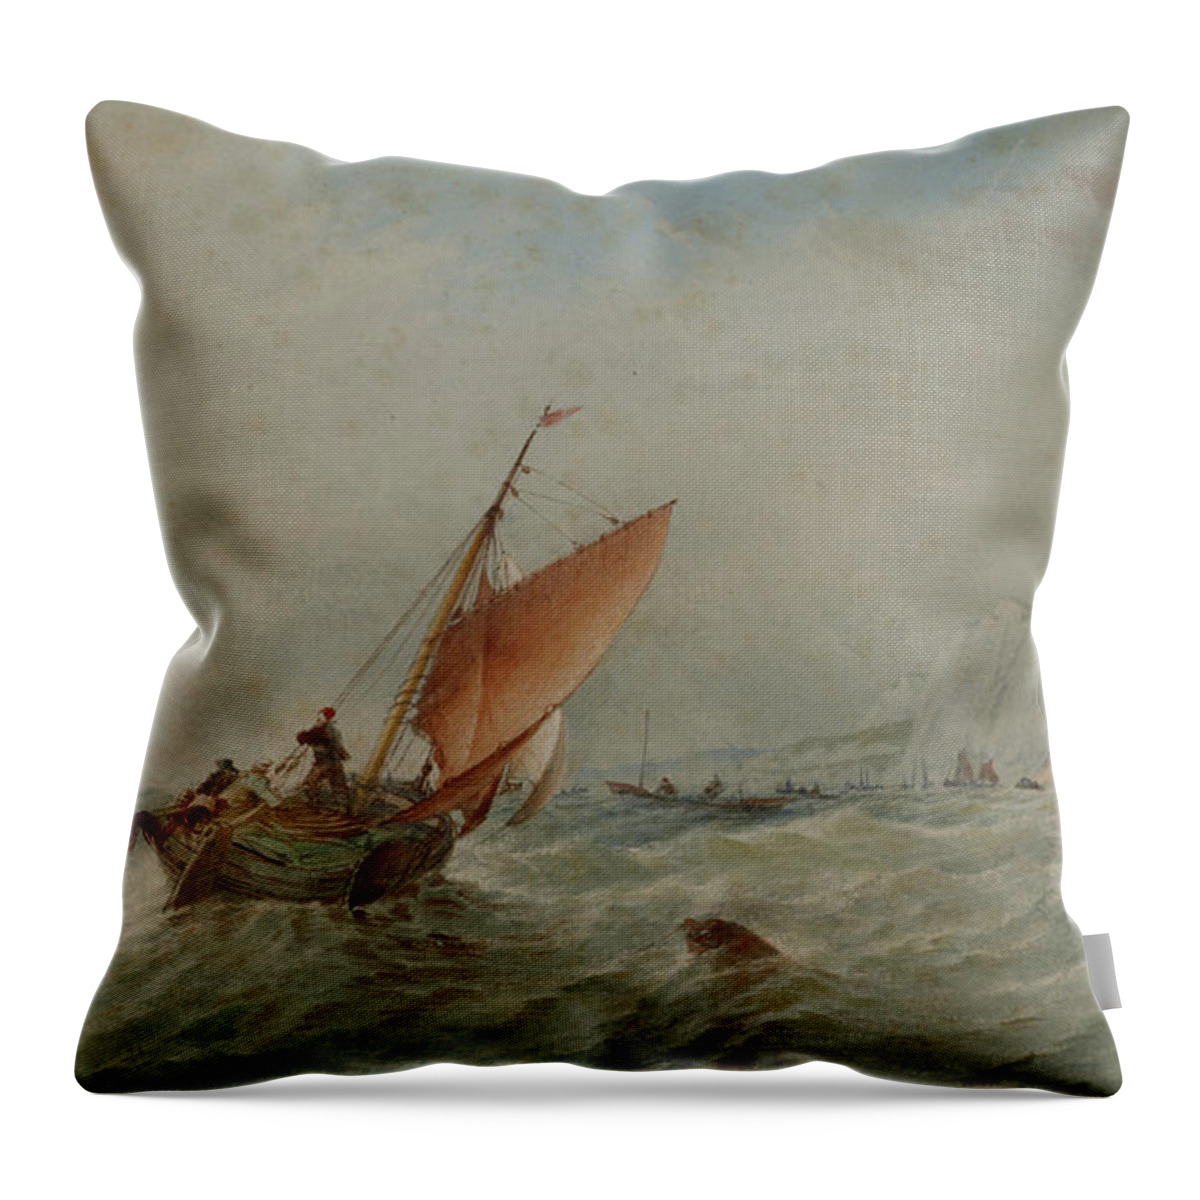 Marine Throw Pillow featuring the painting England by Marine